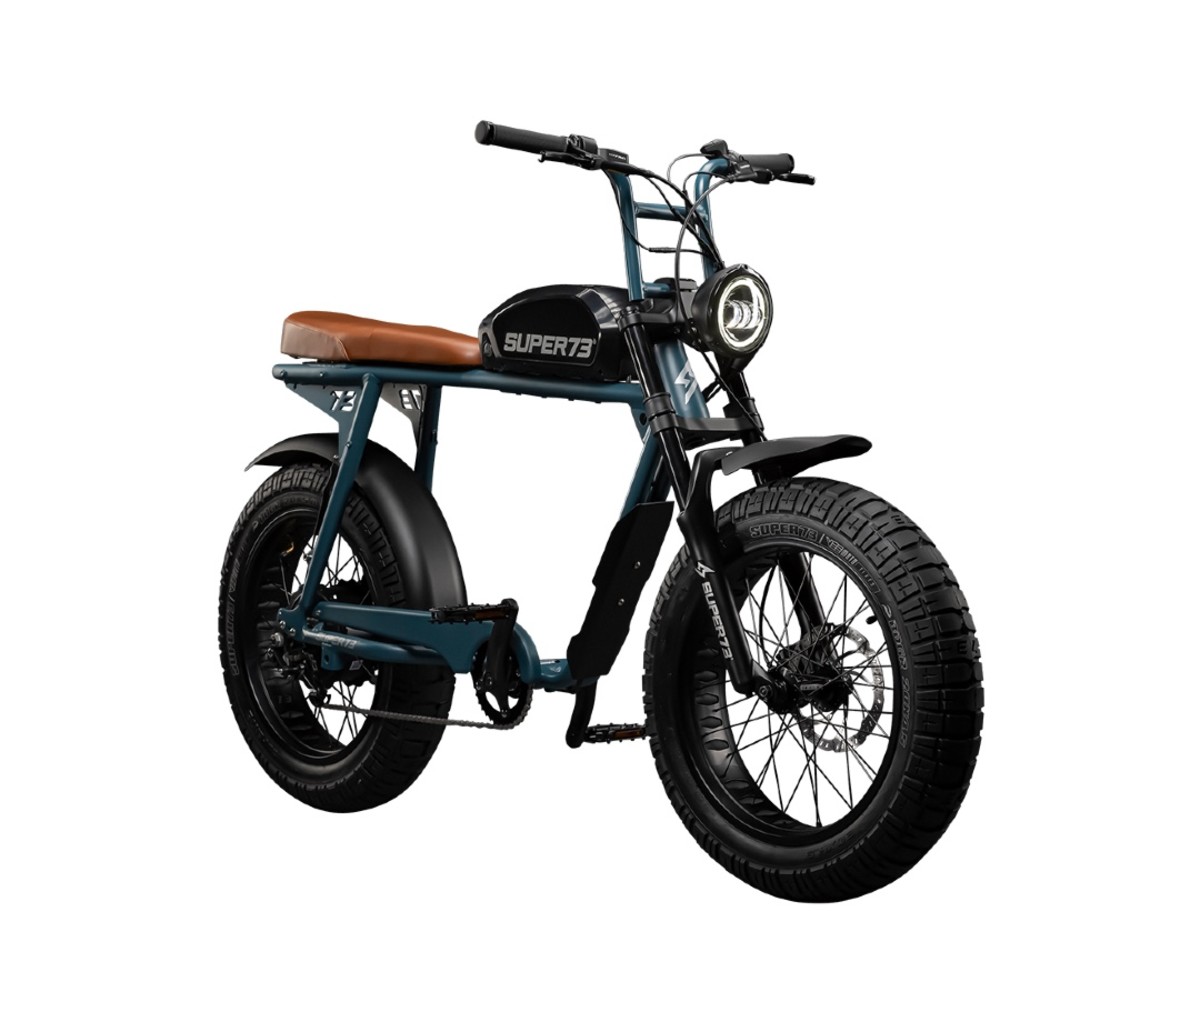 Best Retro-Styled Electric Mopeds of 2022